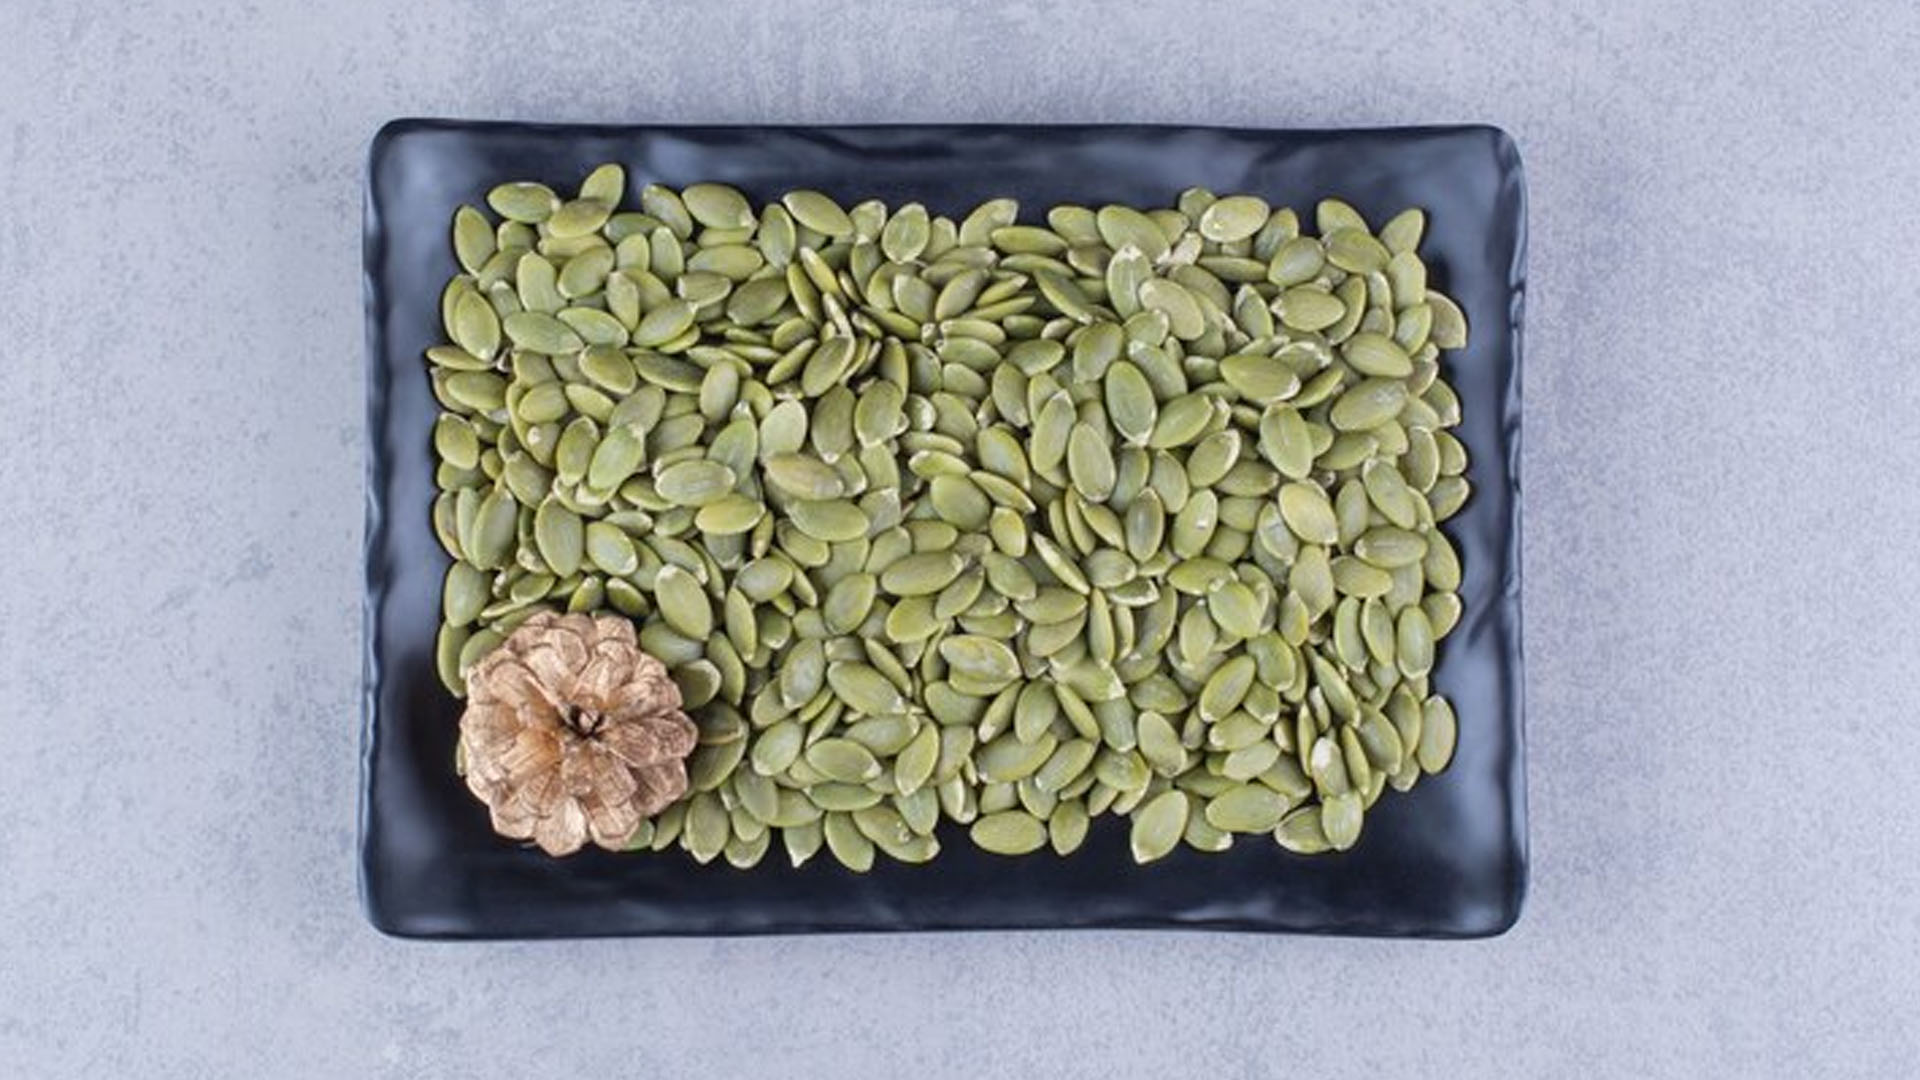 What Are The Health Benefits of Eating Raw Pumpkin Seeds?